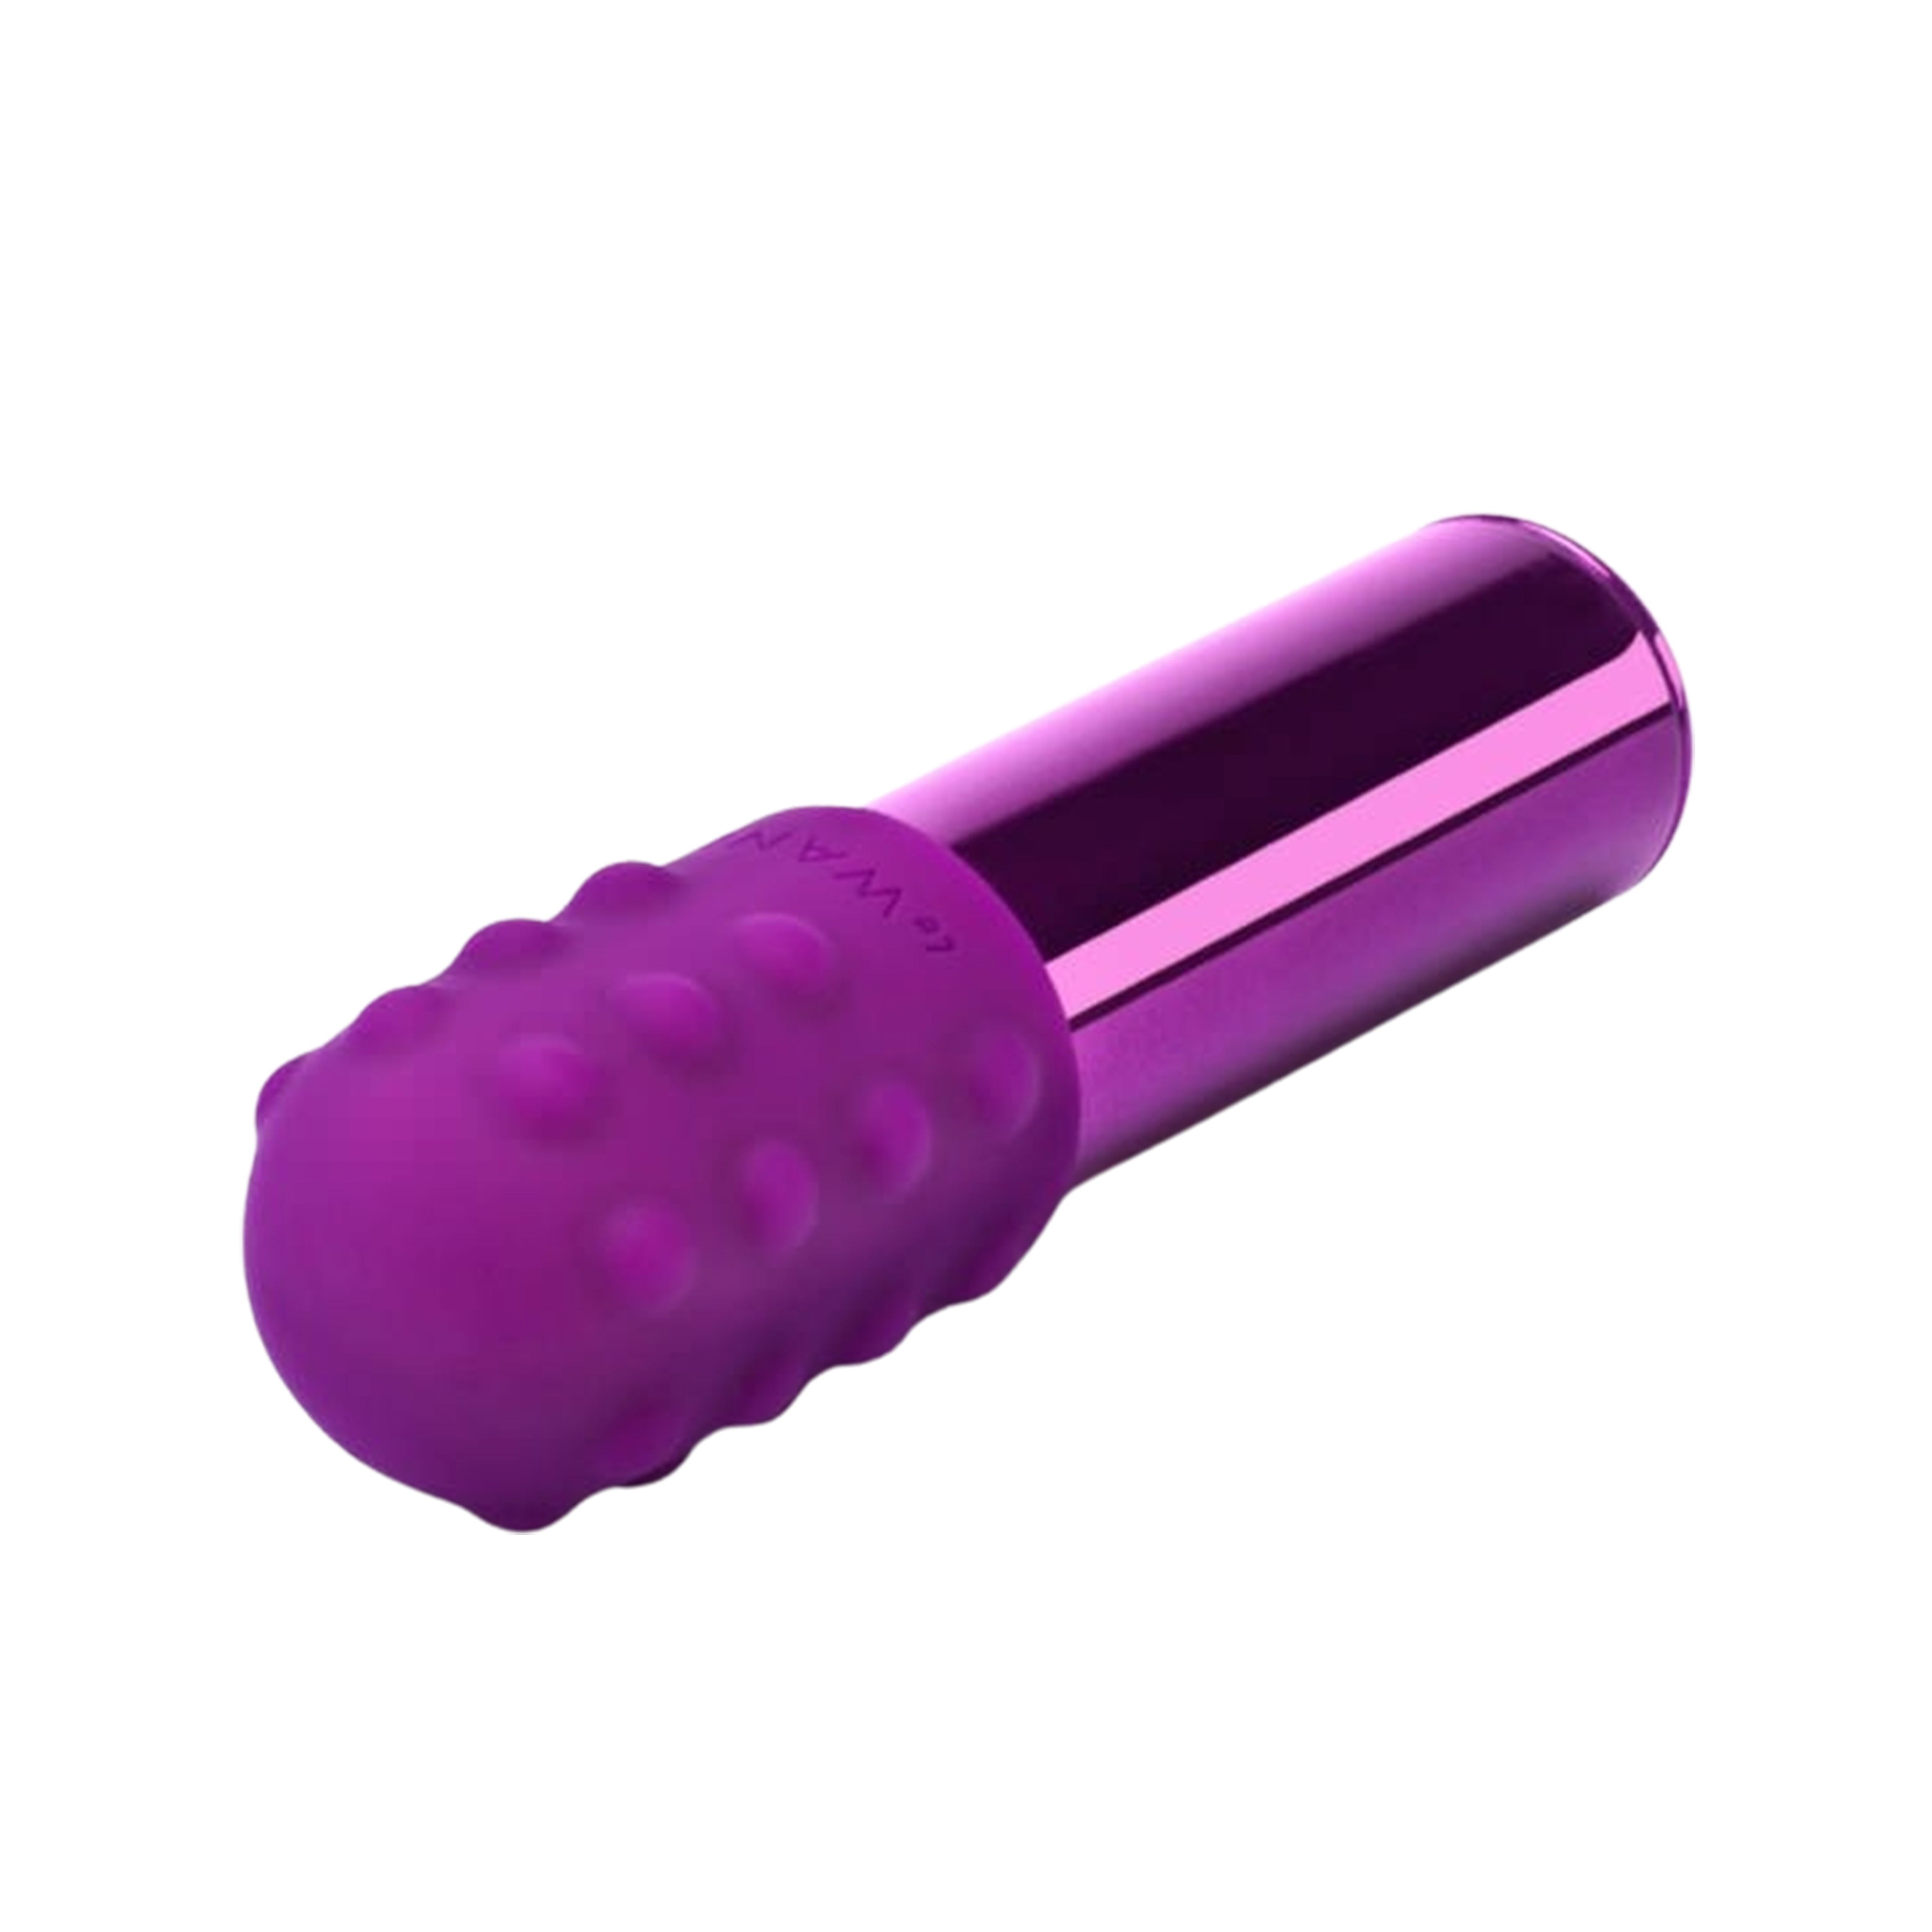 Textured Silicone Sleeve and Ring Mini Vibrating Bullet